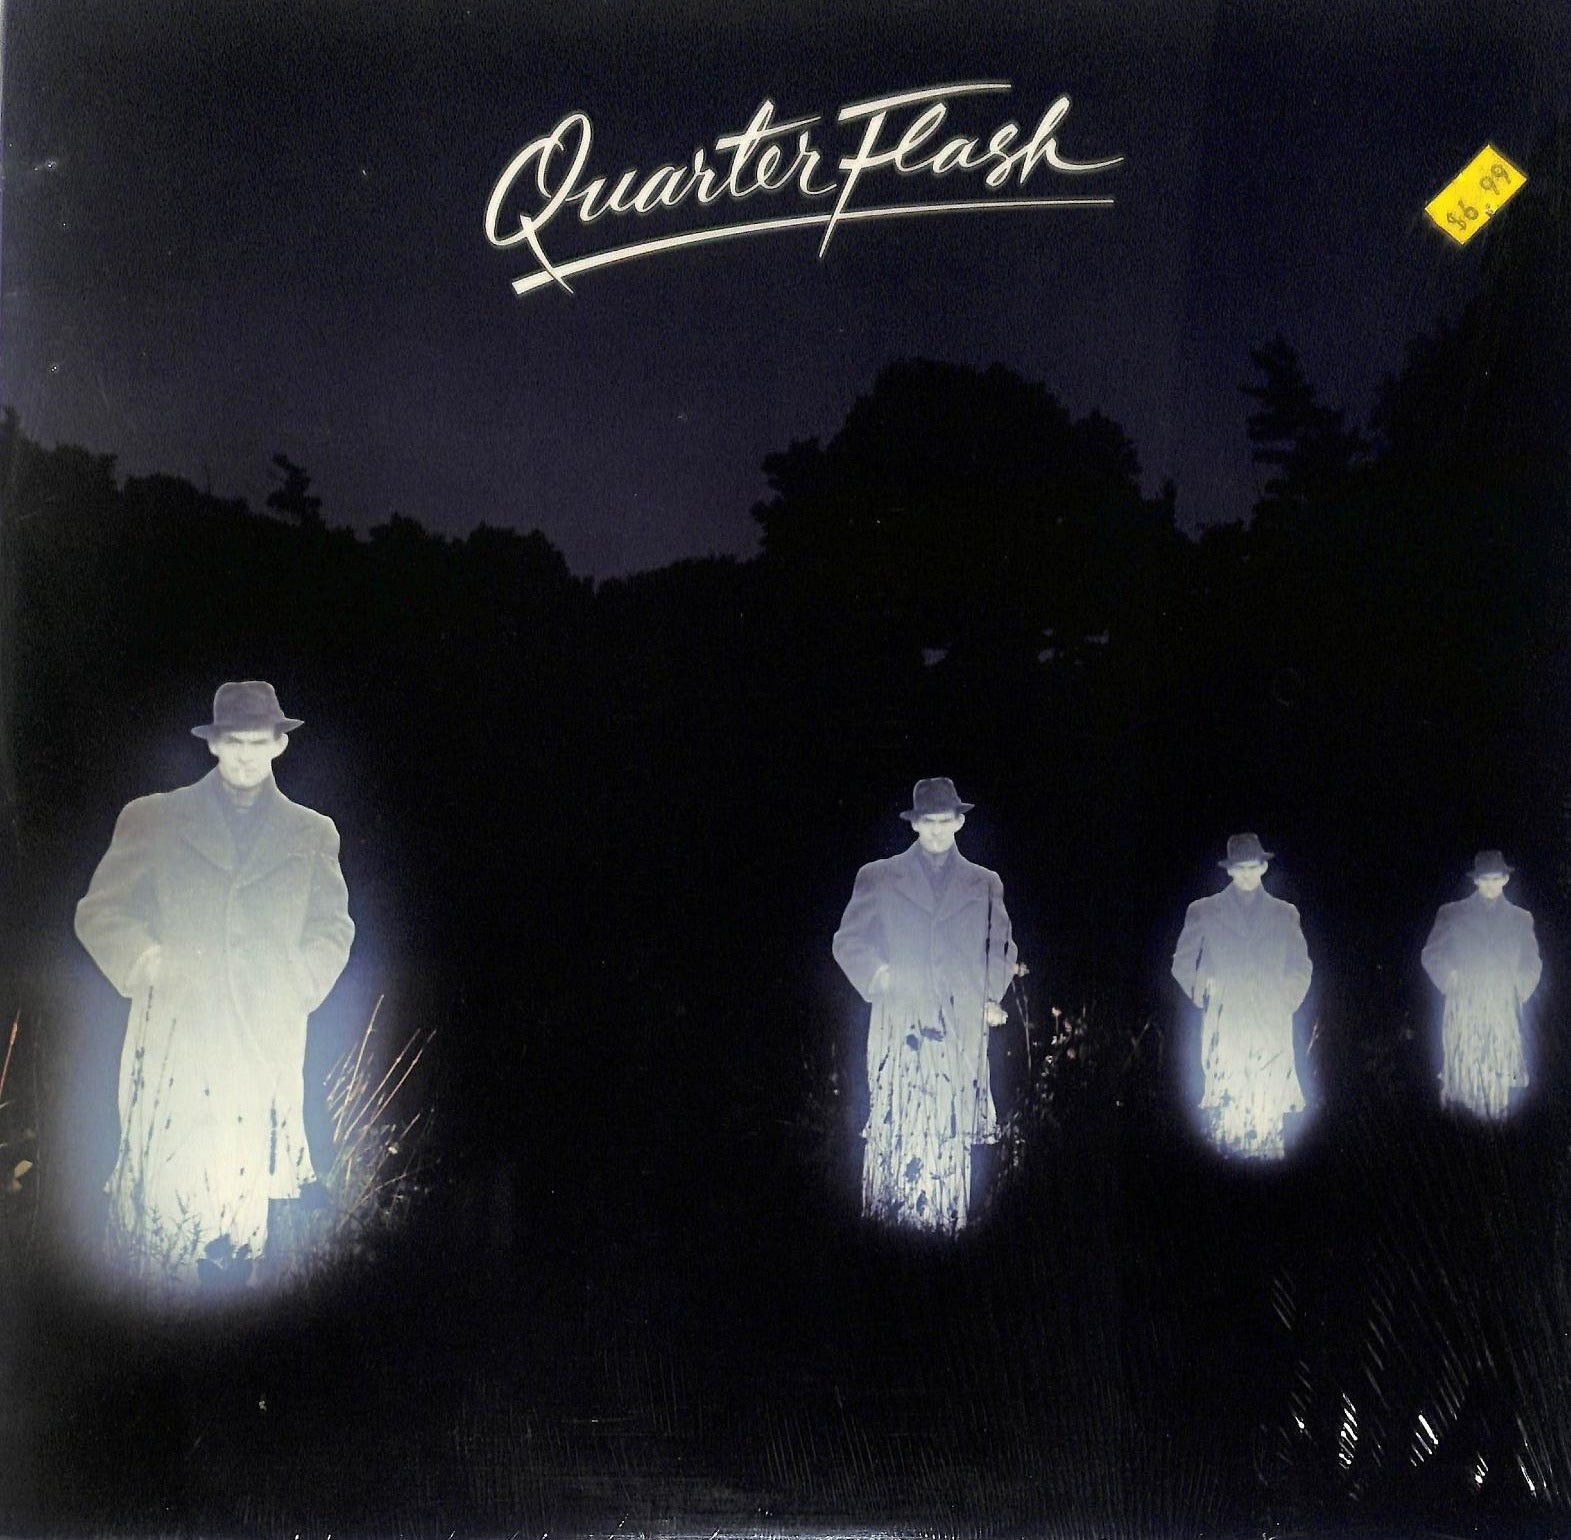 "Quarterflash" by Quarterflash is a debut album marked by its blend of rock and pop with a unique saxophone presence. The album is best known for the hit single "Harden My Heart," which showcases the band's catchy melodies and Rindy Ross' distinctive saxophone and vocal skills. This release captures the early '80s pop-rock essence, with Quarterflash's sound characterized by a polished, radio-friendly style combined with heartfelt lyrics and energetic instrumentals.